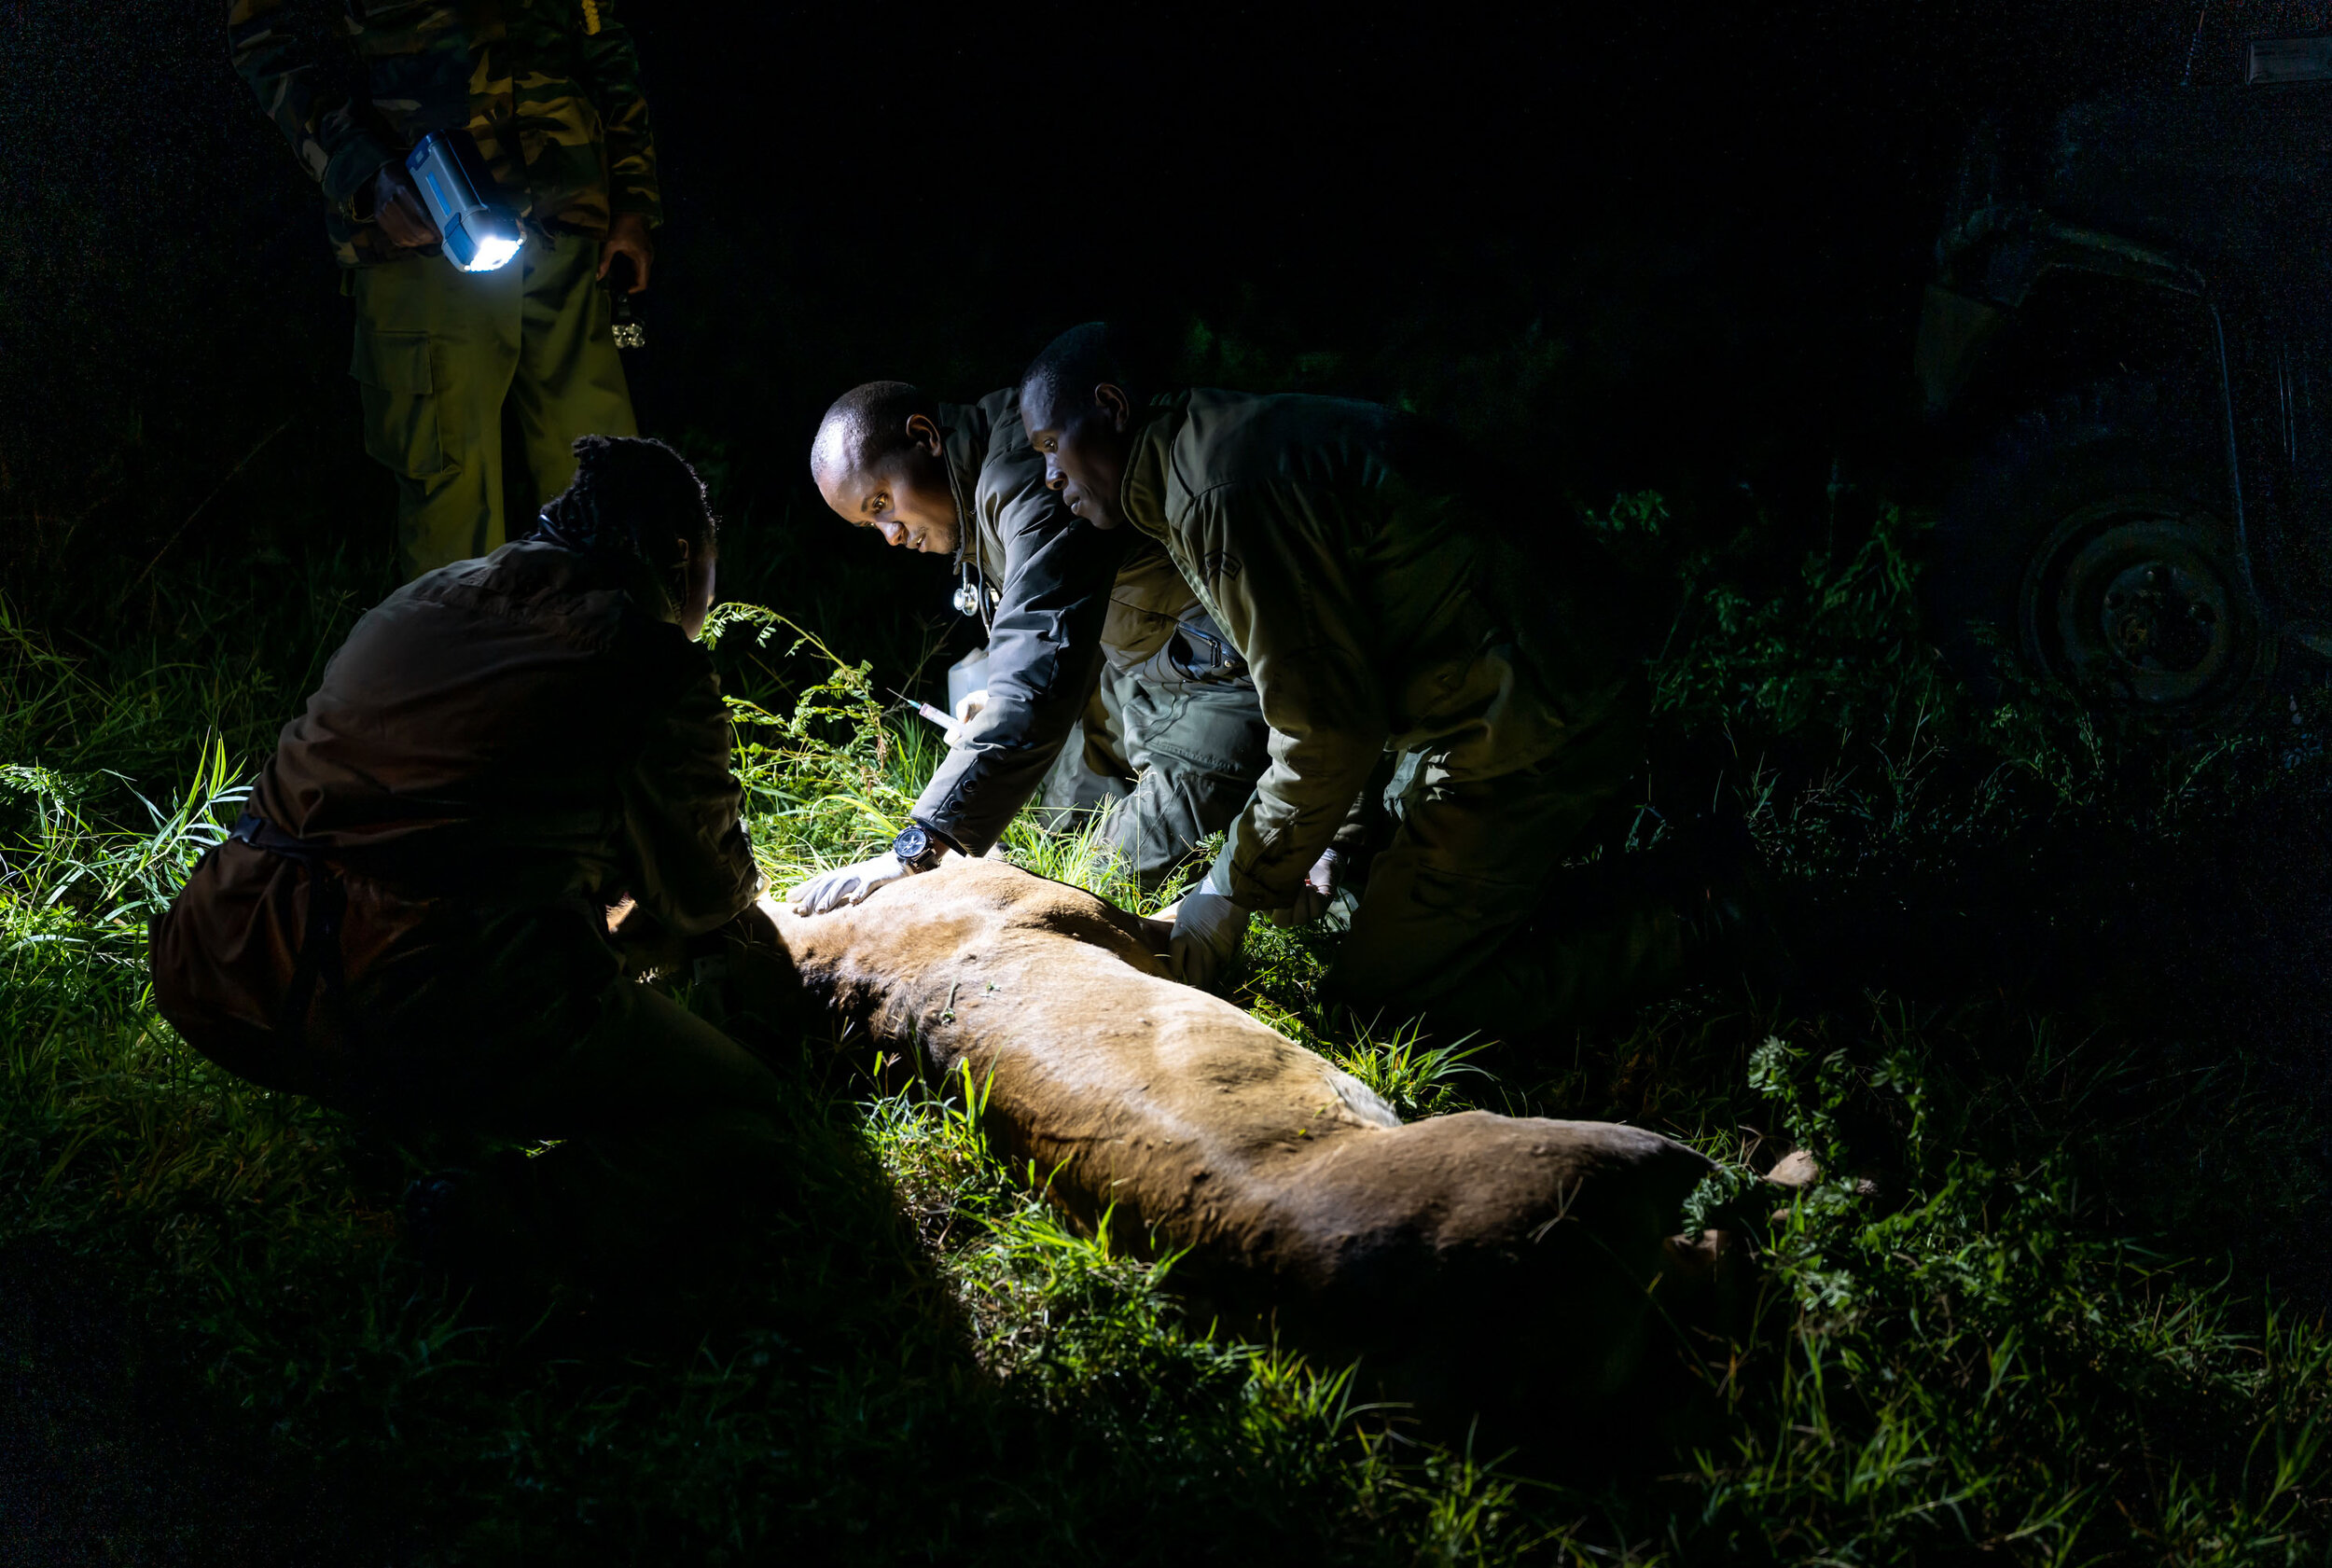 Dr. Mathew Mutinda, a Kenya Wildlife Service veterinarian, center, examines a female lion he has just tranquilized on the Loisaba Conservancy in the Laikipia region of Kenya